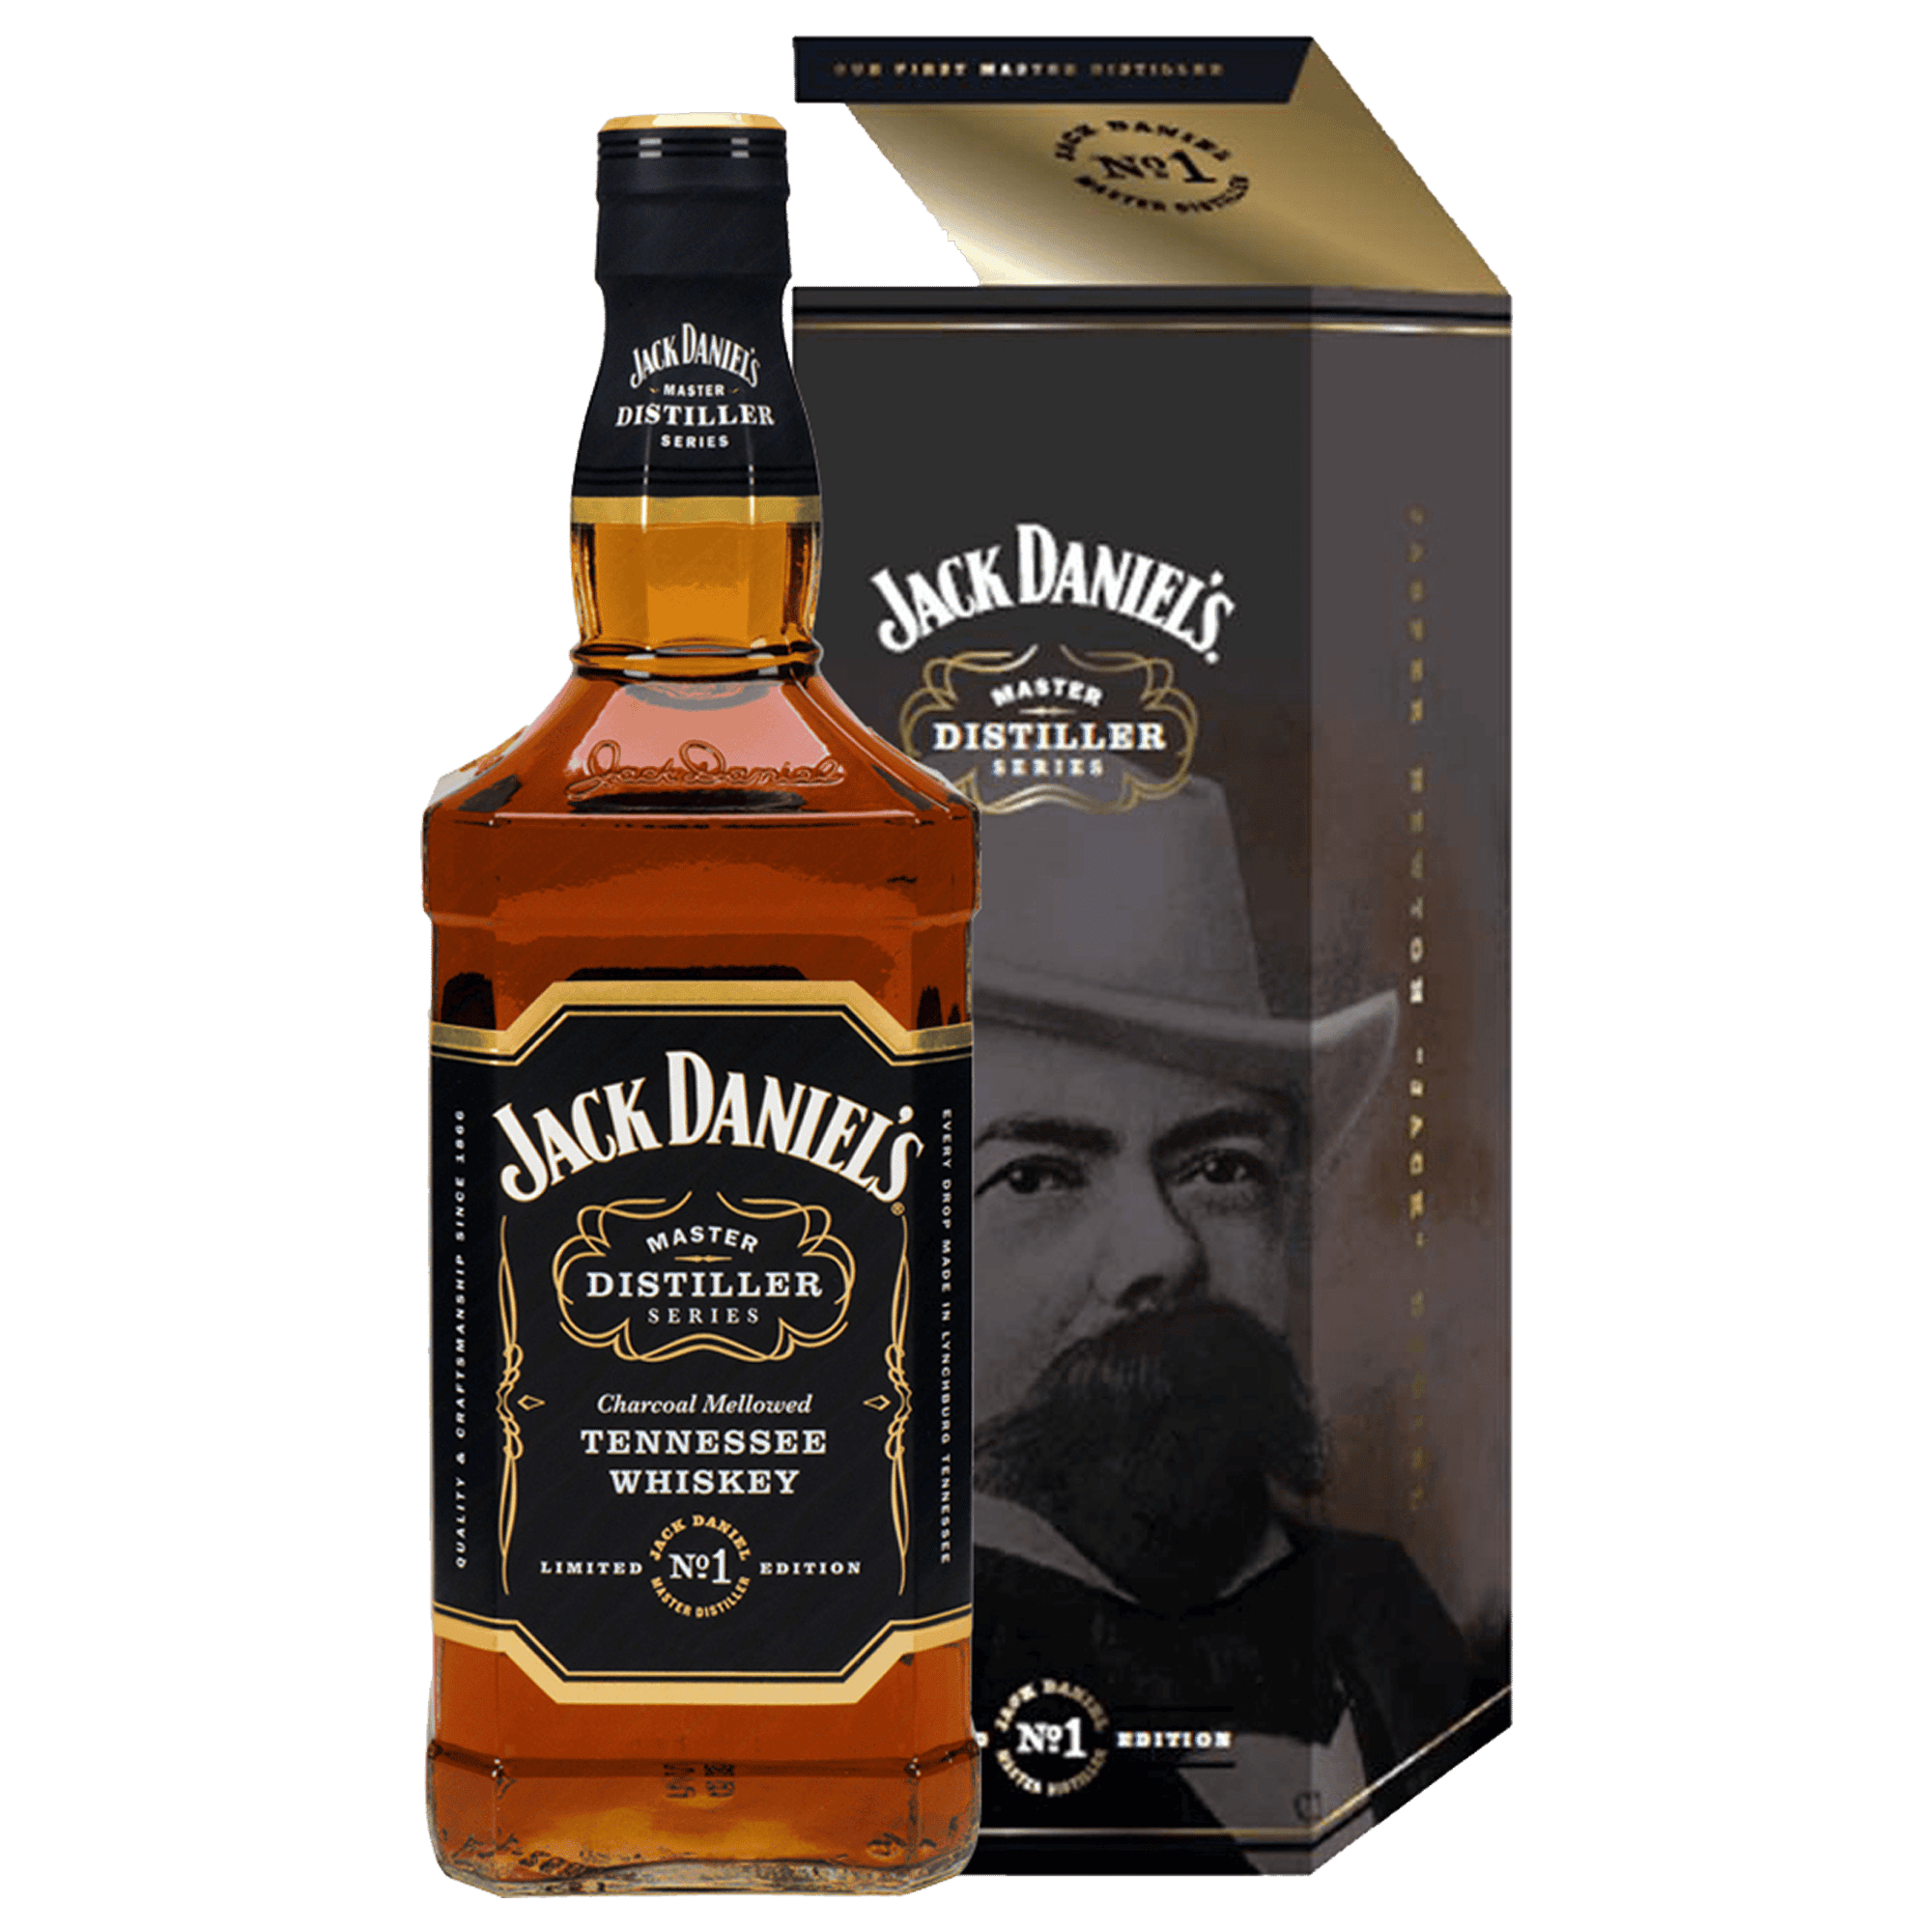 JACK DANIELS MASTER DISTILLERS SERIES NO. 1 TENNESSEE WHISKEY